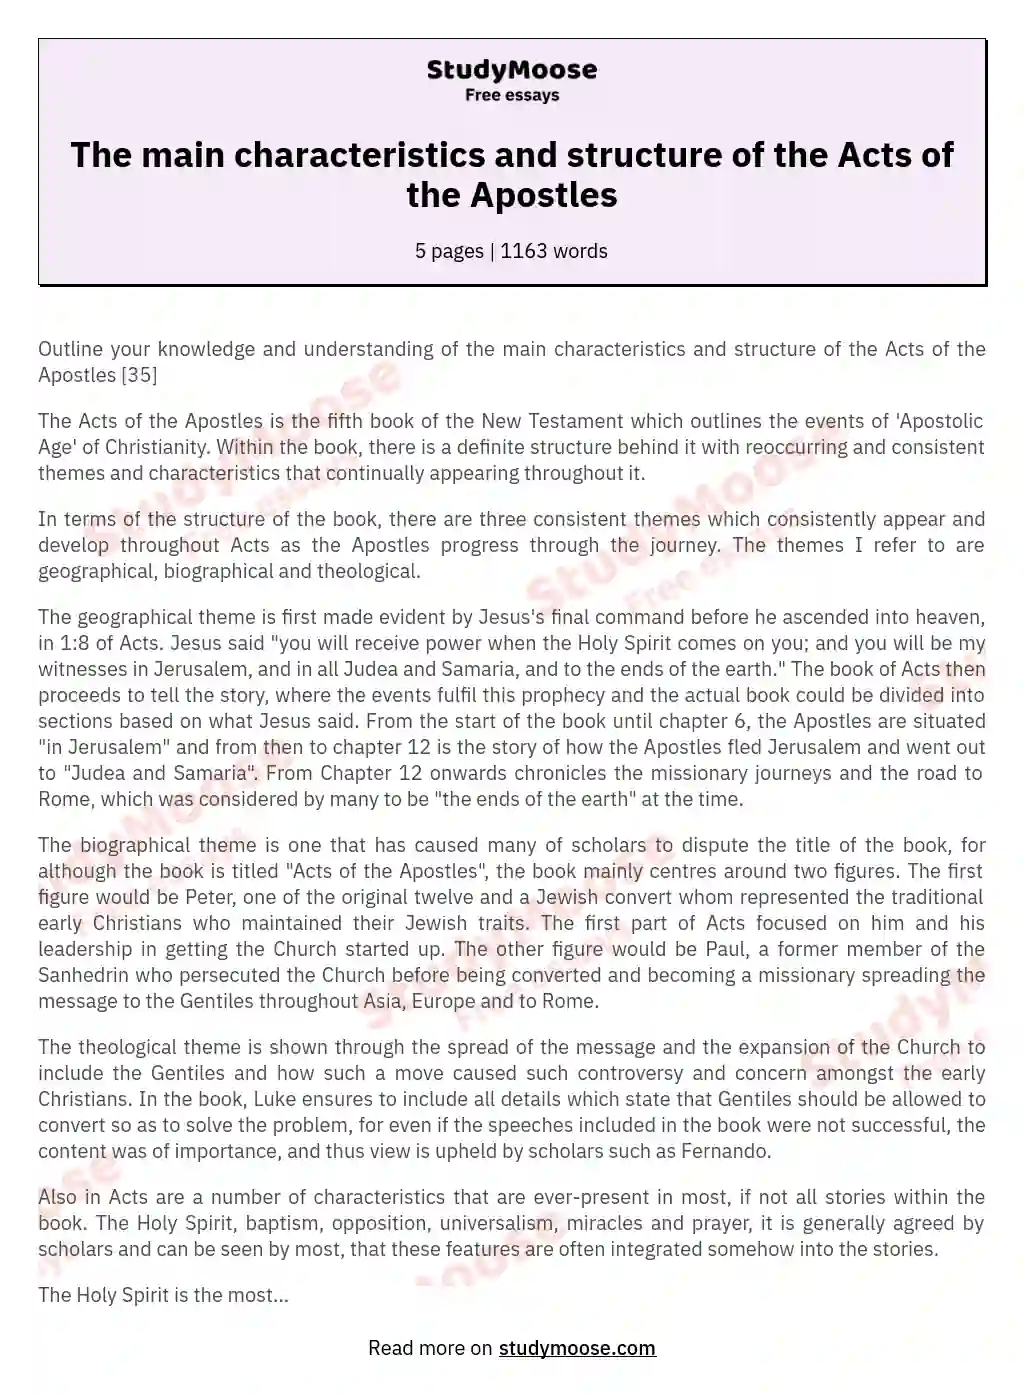 The main characteristics and structure of the Acts of the Apostles essay